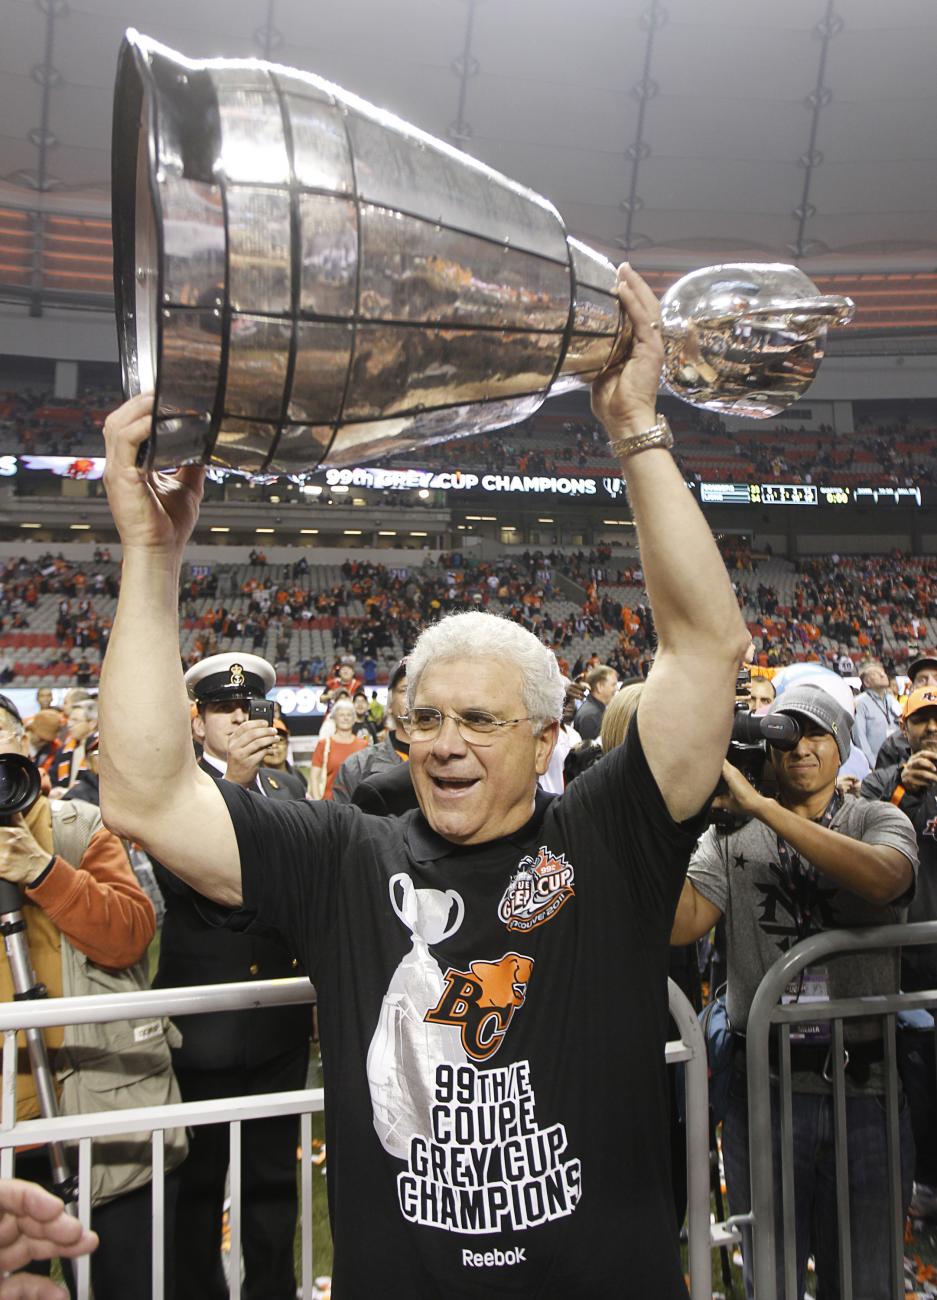 Wally Buono in stadium full of people, holding a large trophy cup above his head.